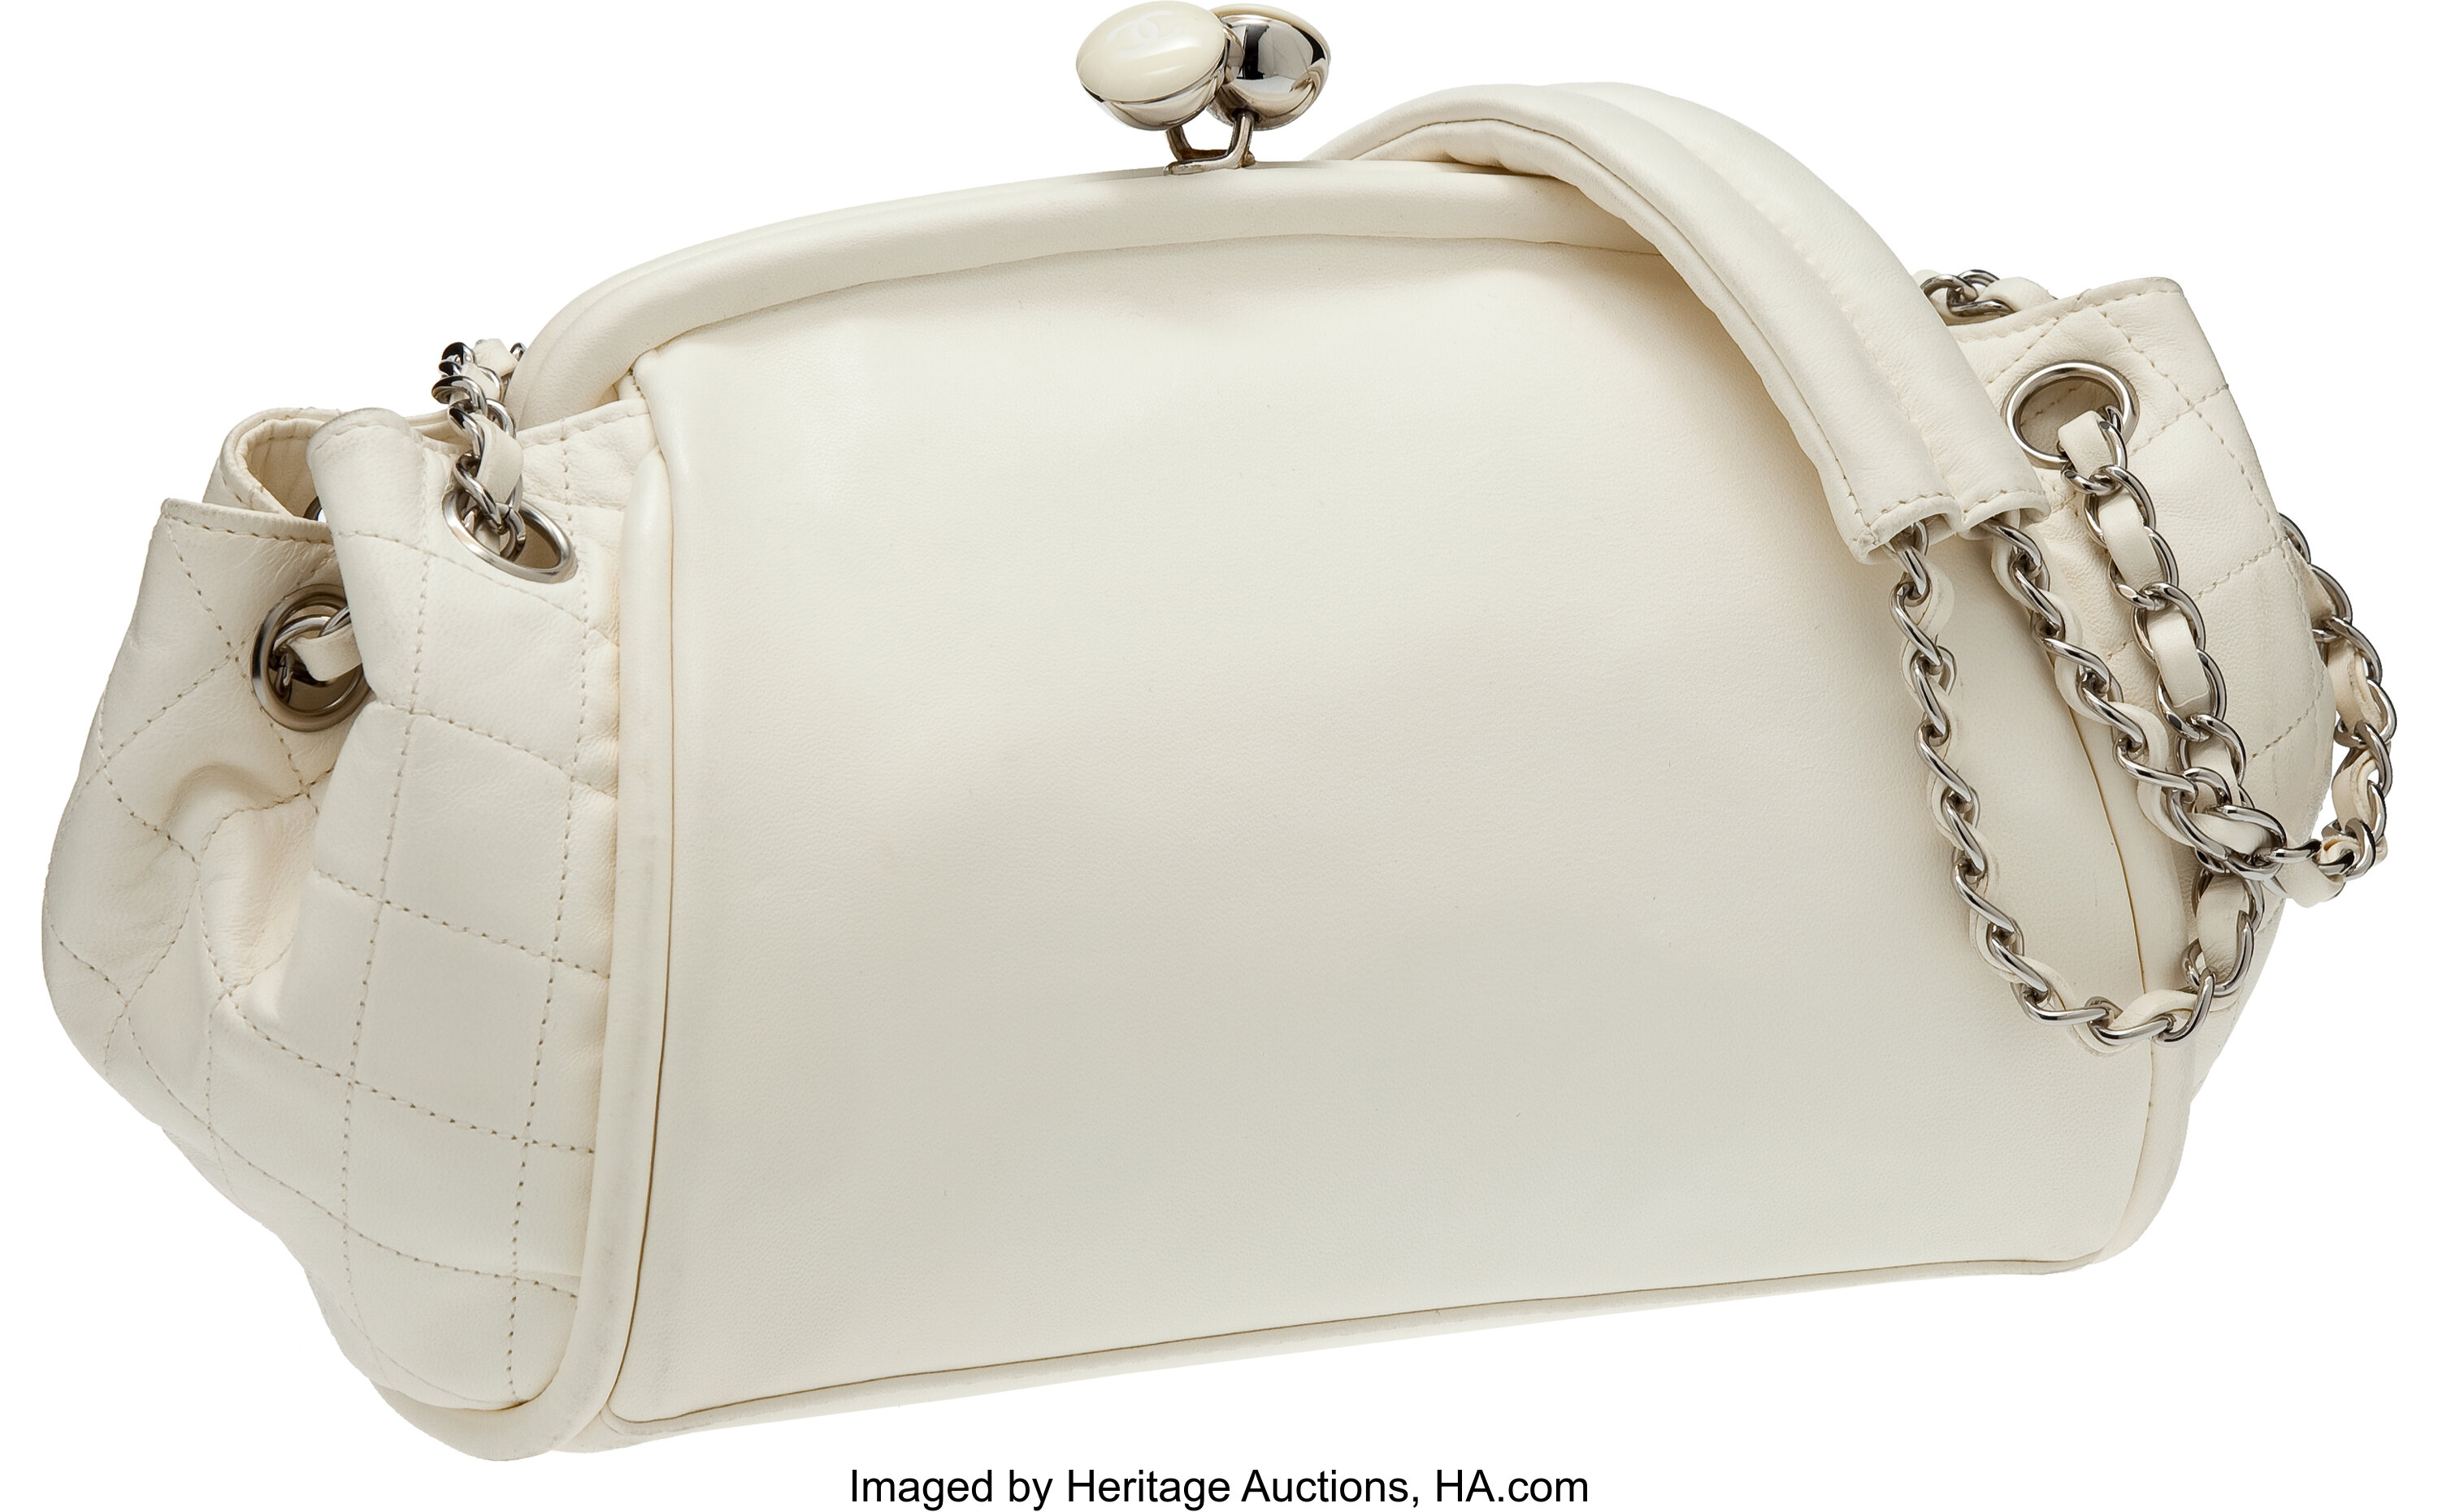 Chanel White Lambskin Kiss-Lock Closure Bag with Silver Hardware., Lot  #77001